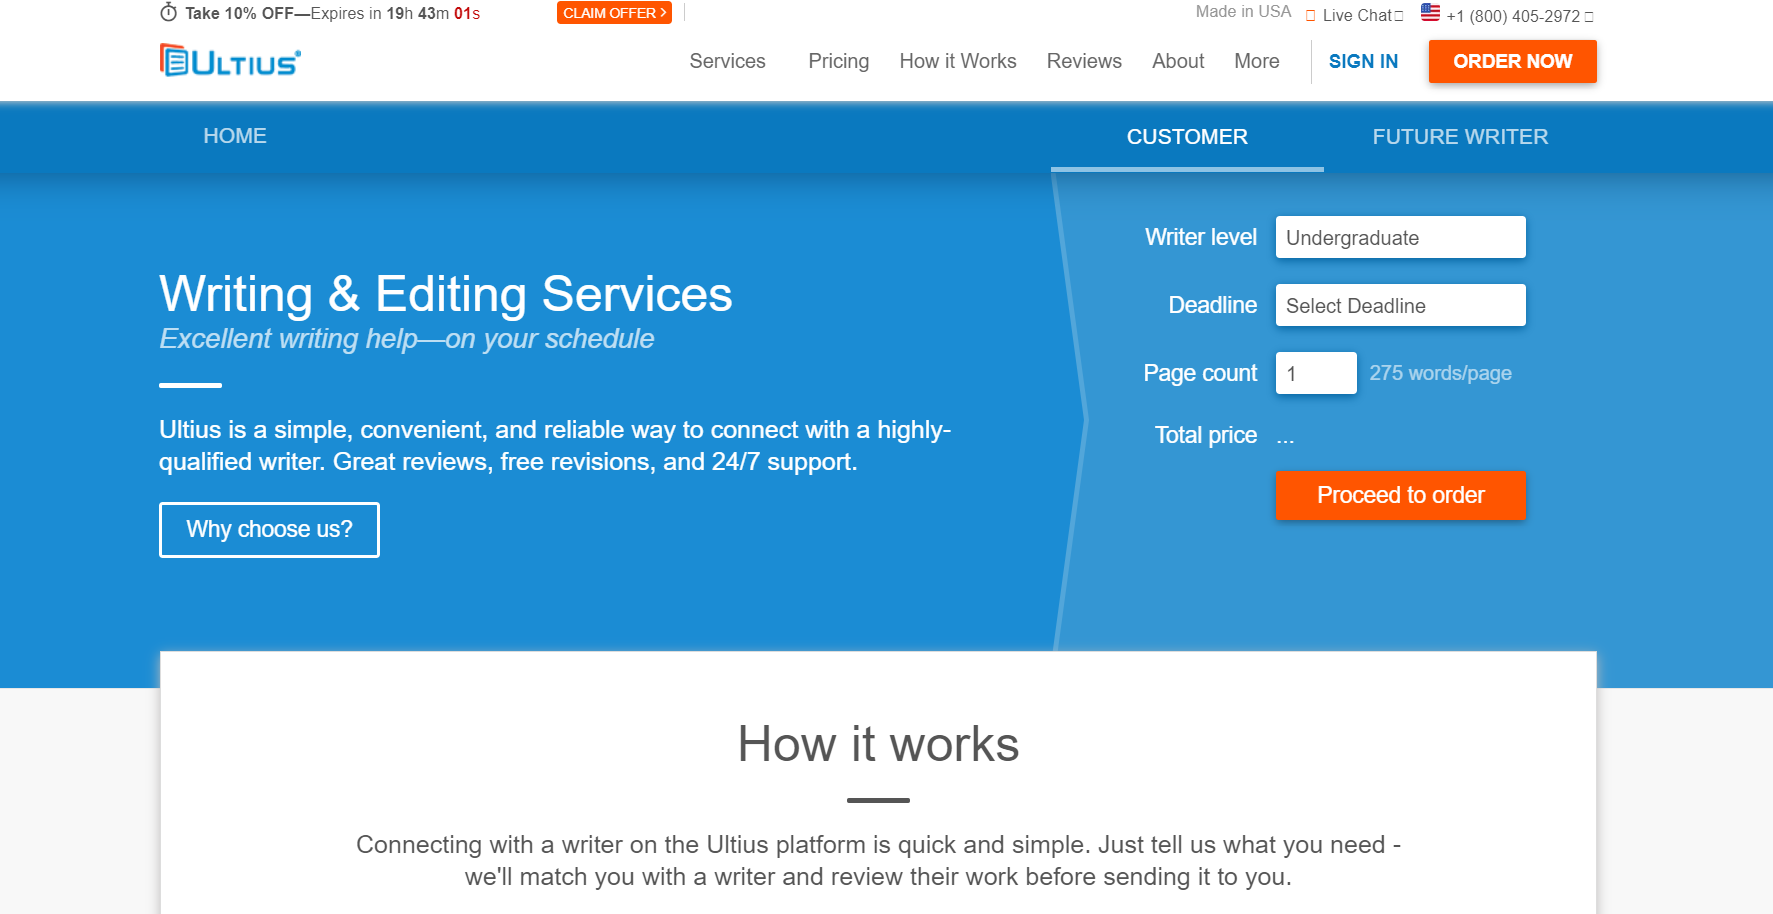 Ultius Writing Service Review | Safe, Legit and Reliable or Scam?
